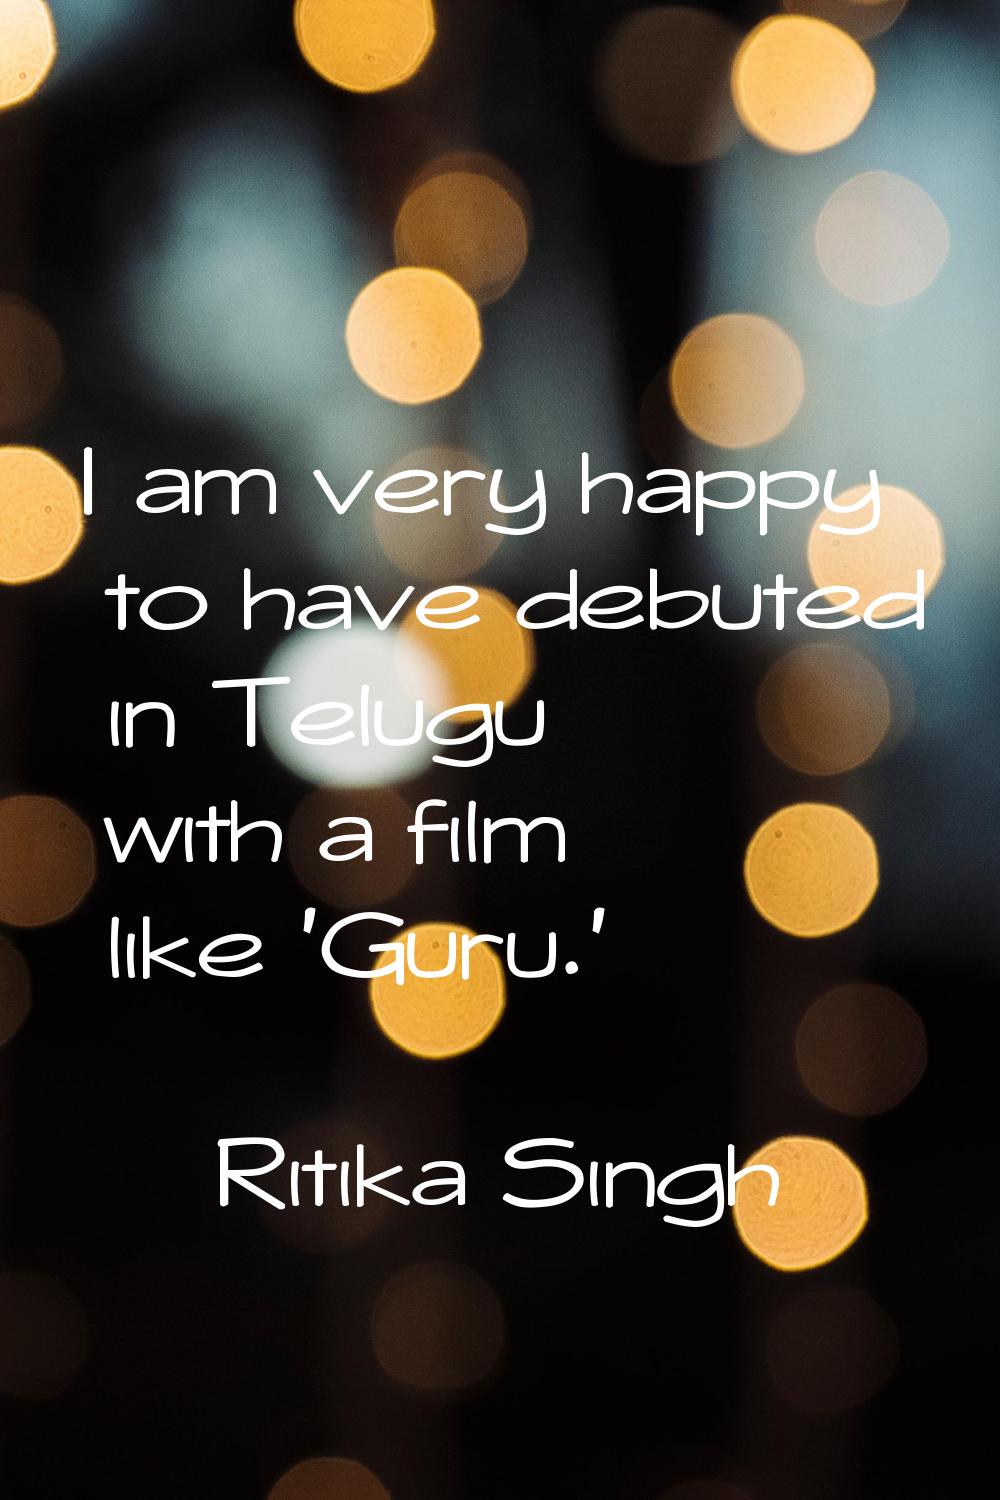 I am very happy to have debuted in Telugu with a film like 'Guru.'